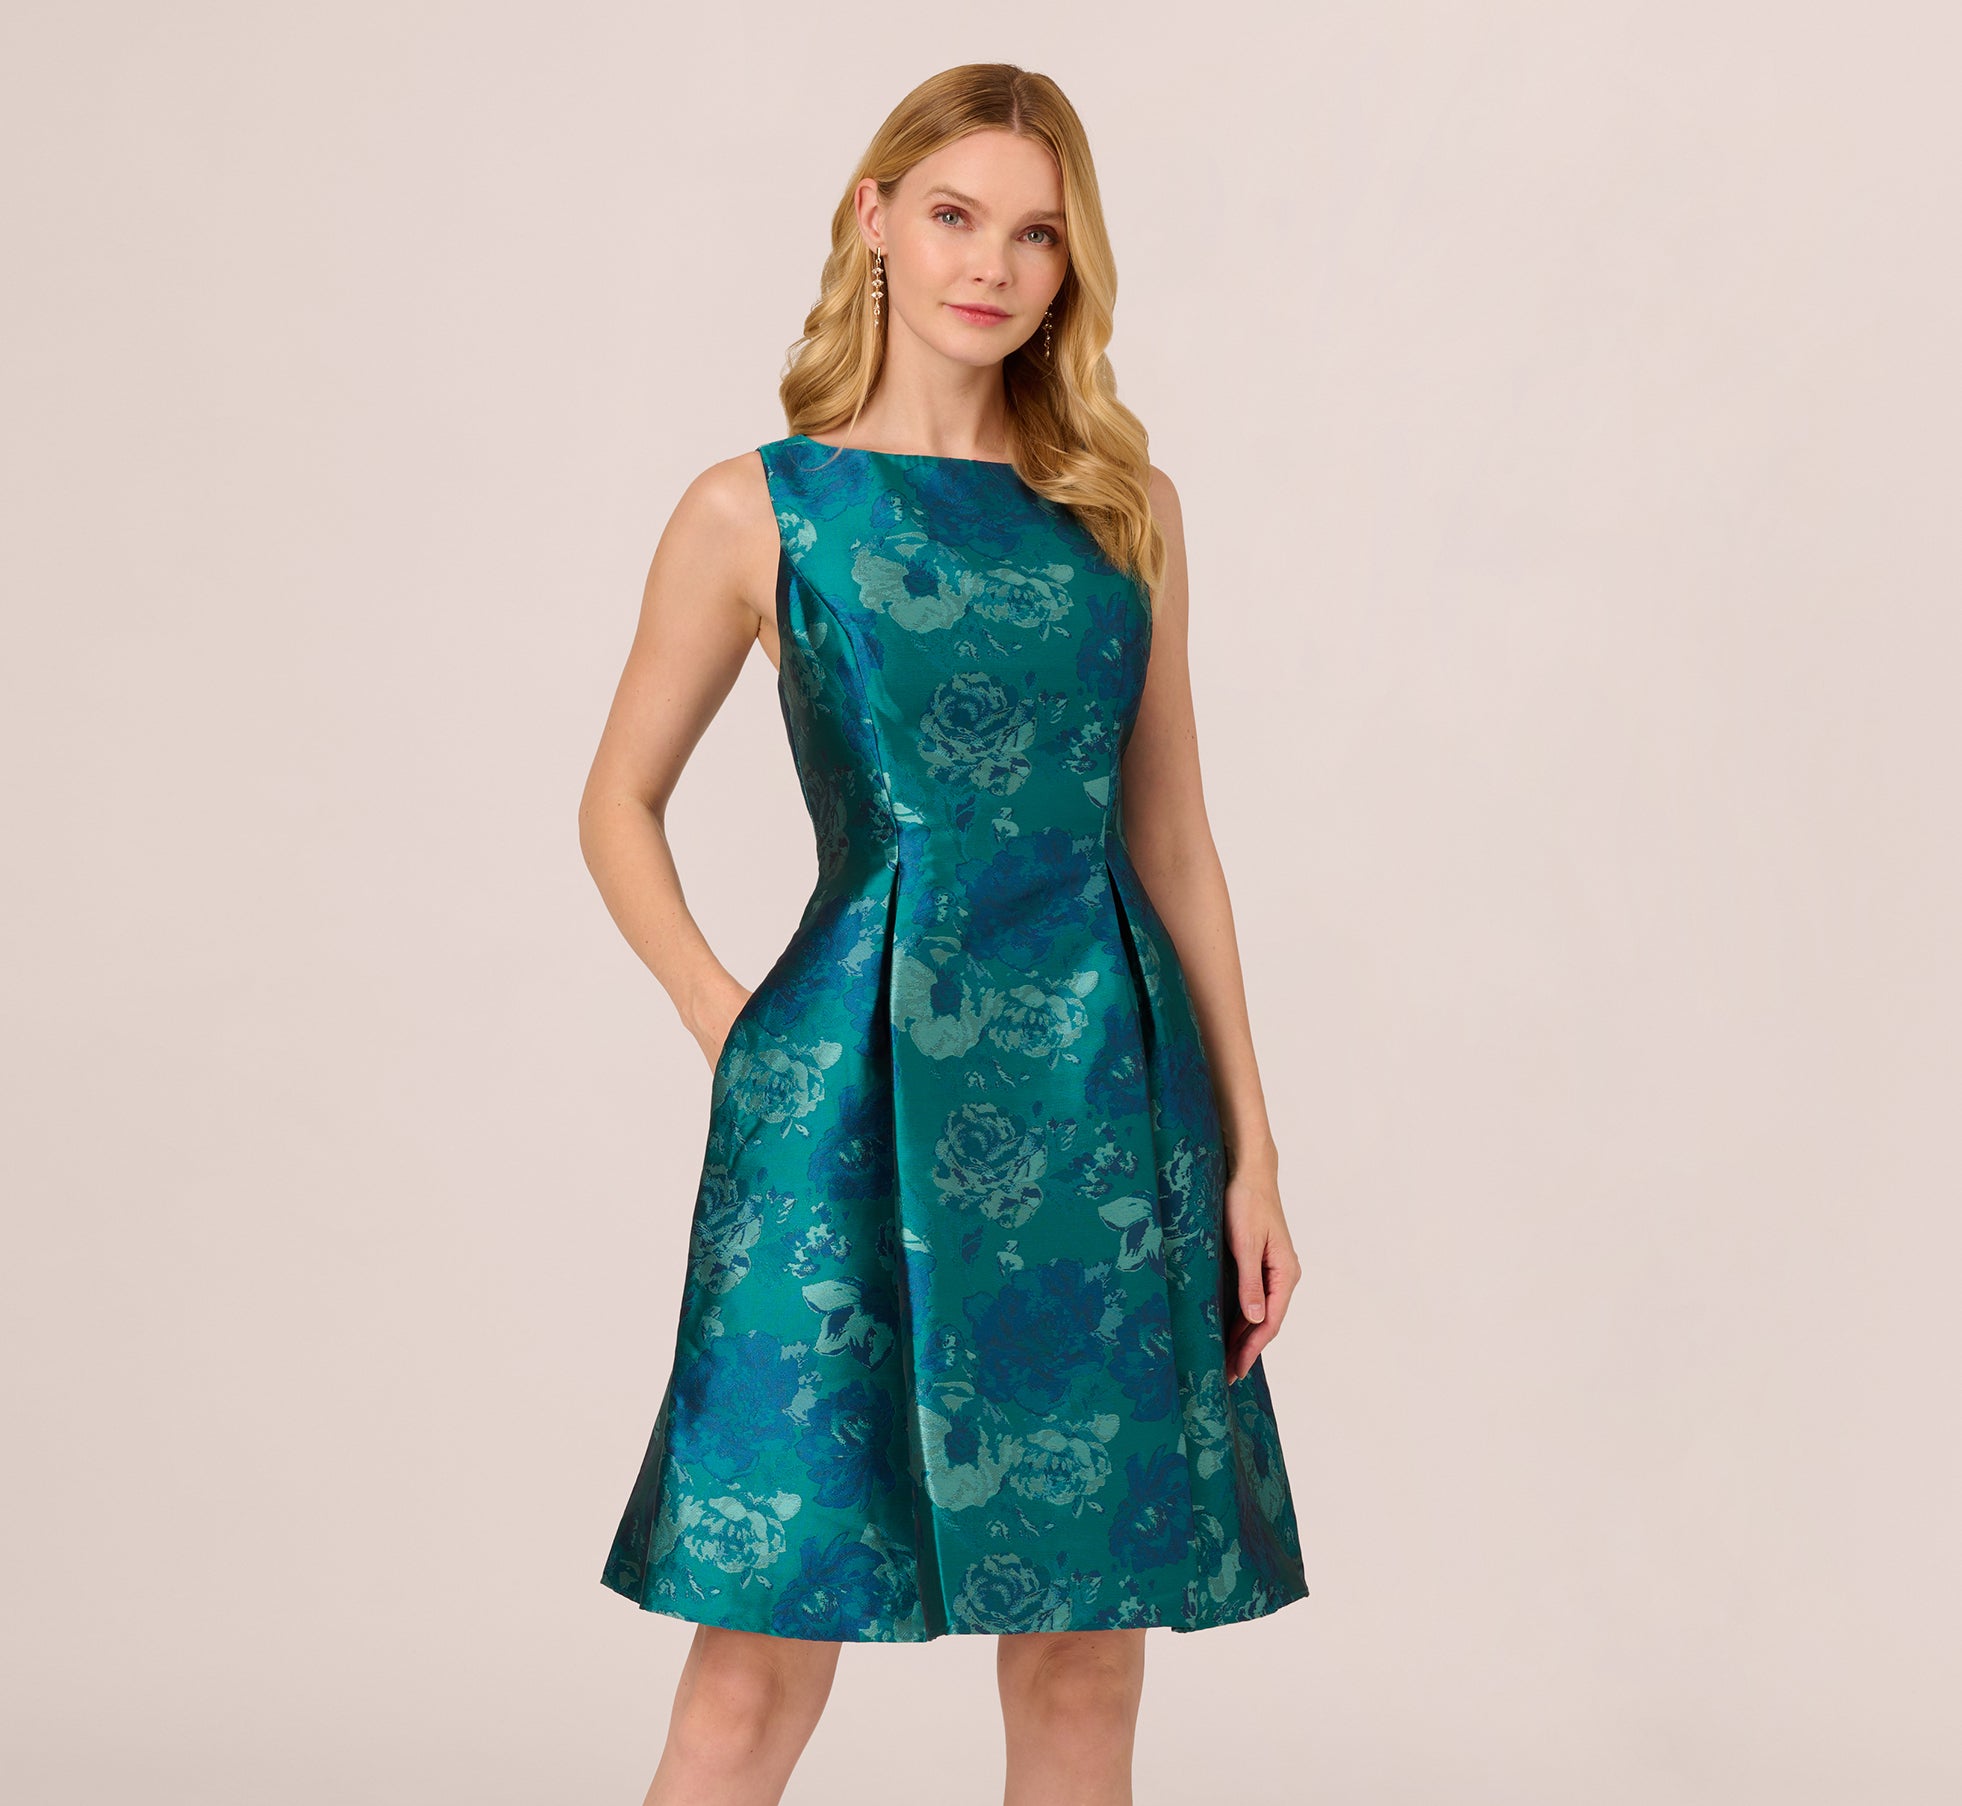 Floral Jacquard Sleeveless Midi Dress With Cutout Back In Teal Multi